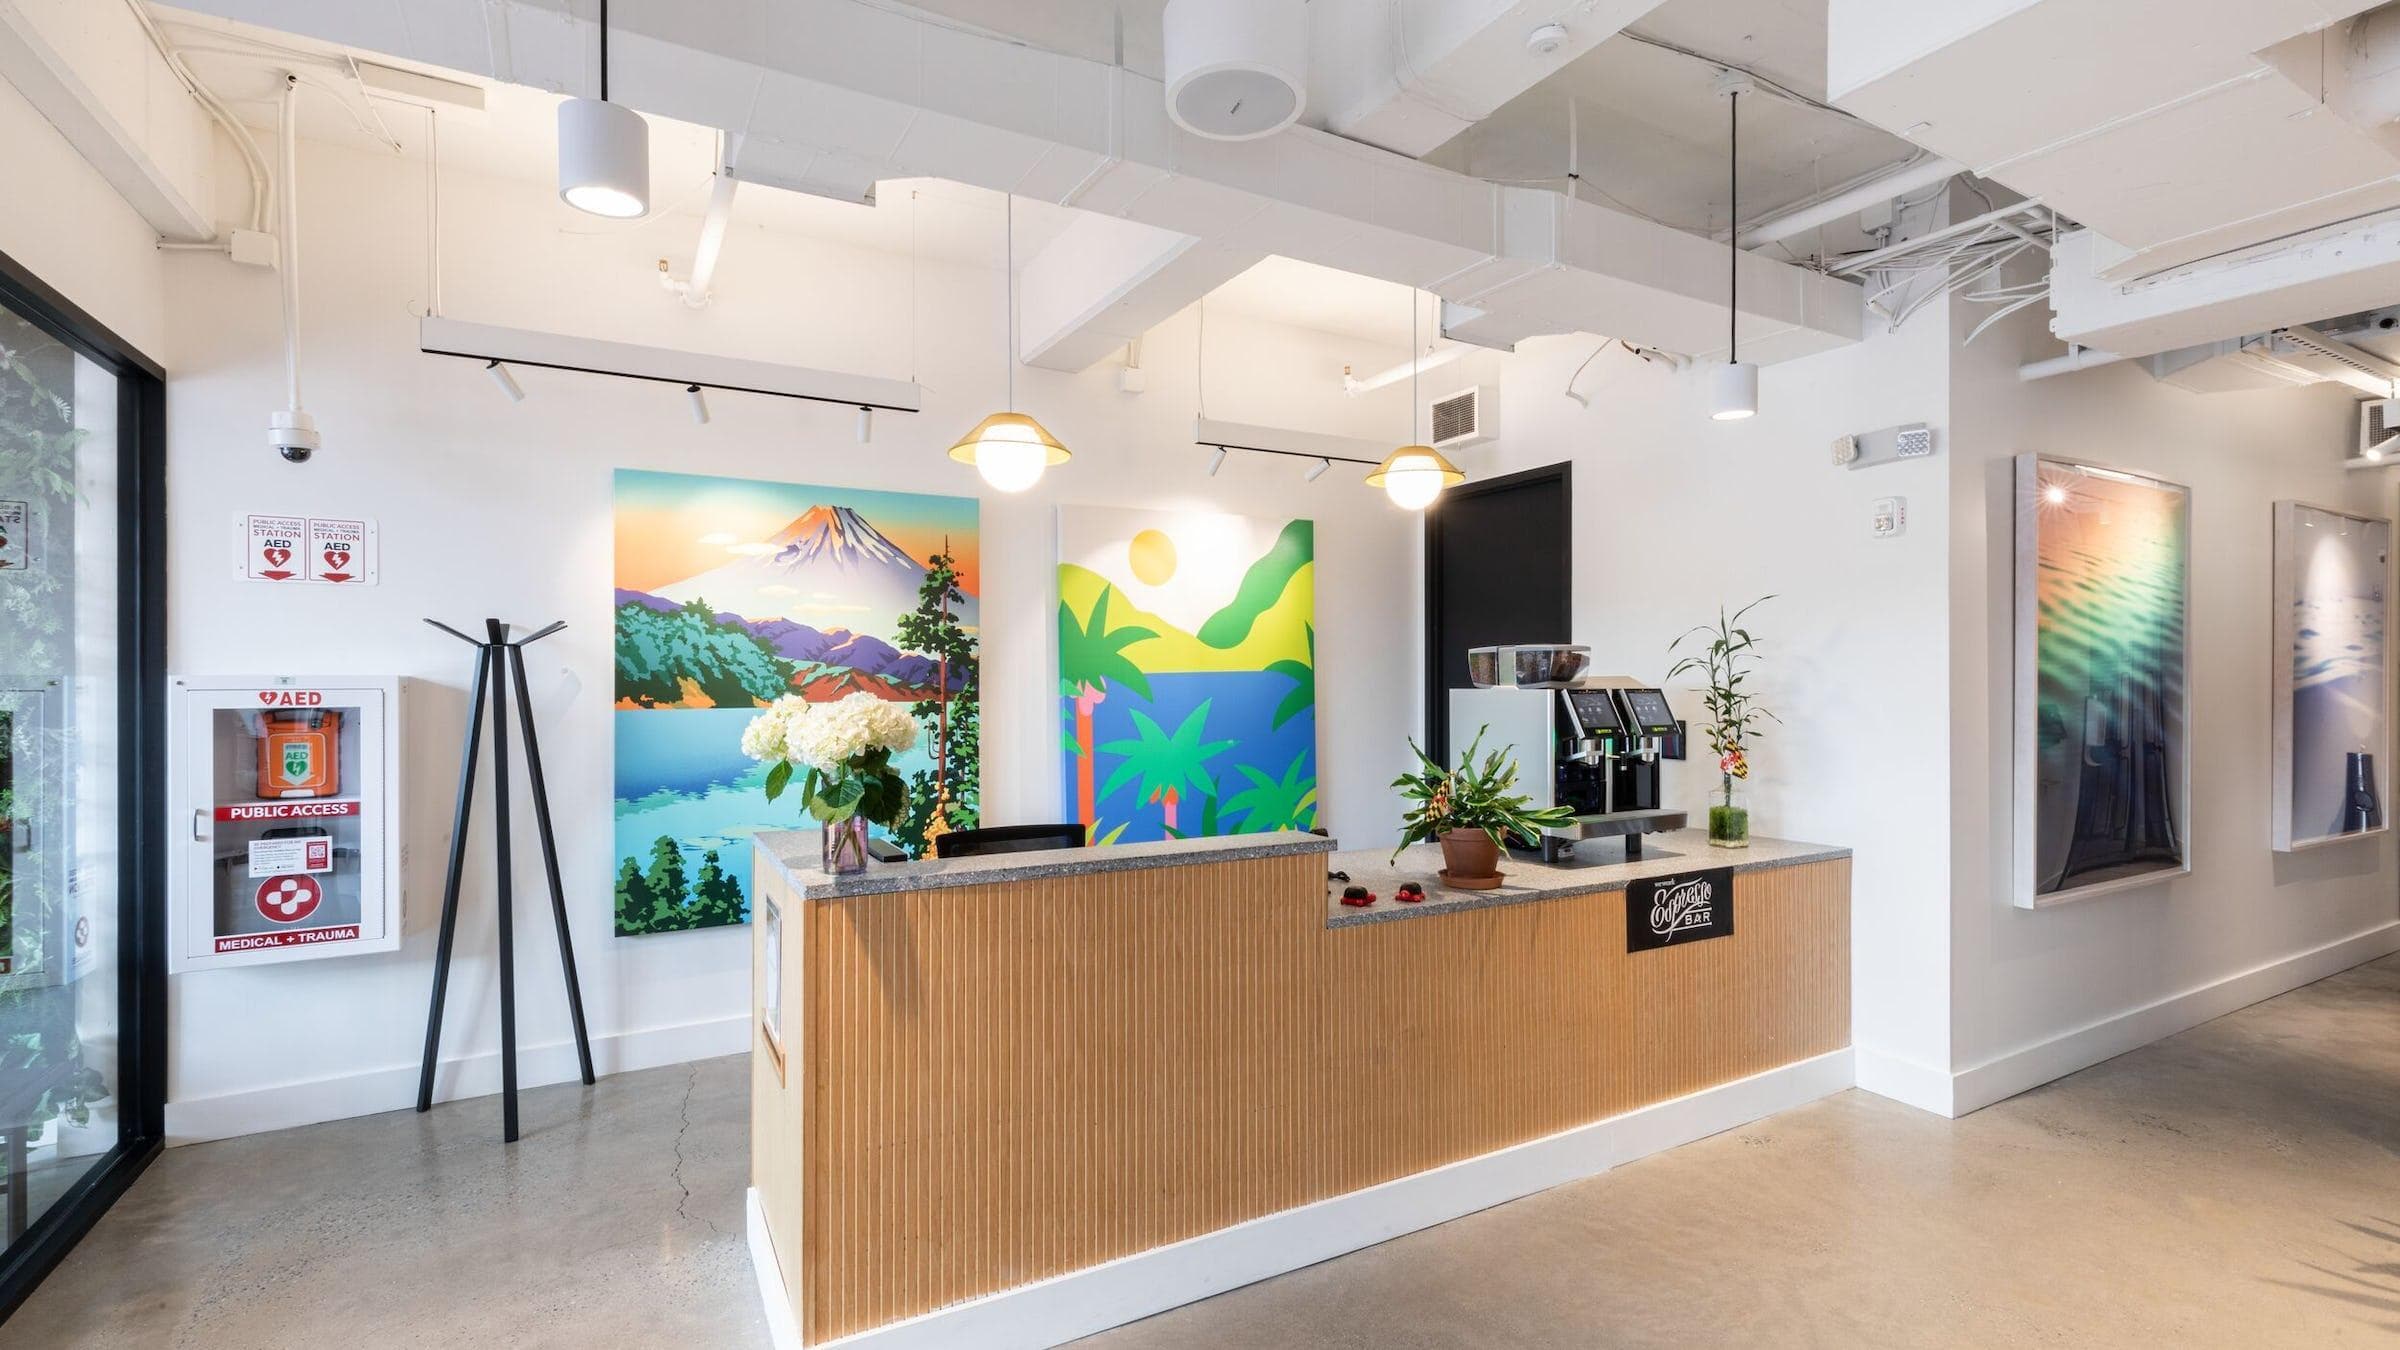 Entrance hall to WeWork in College Park. A welcome desk flanked by a coffee machine station. Green office plants dot the space with Abstracted landscape painting along the walls.